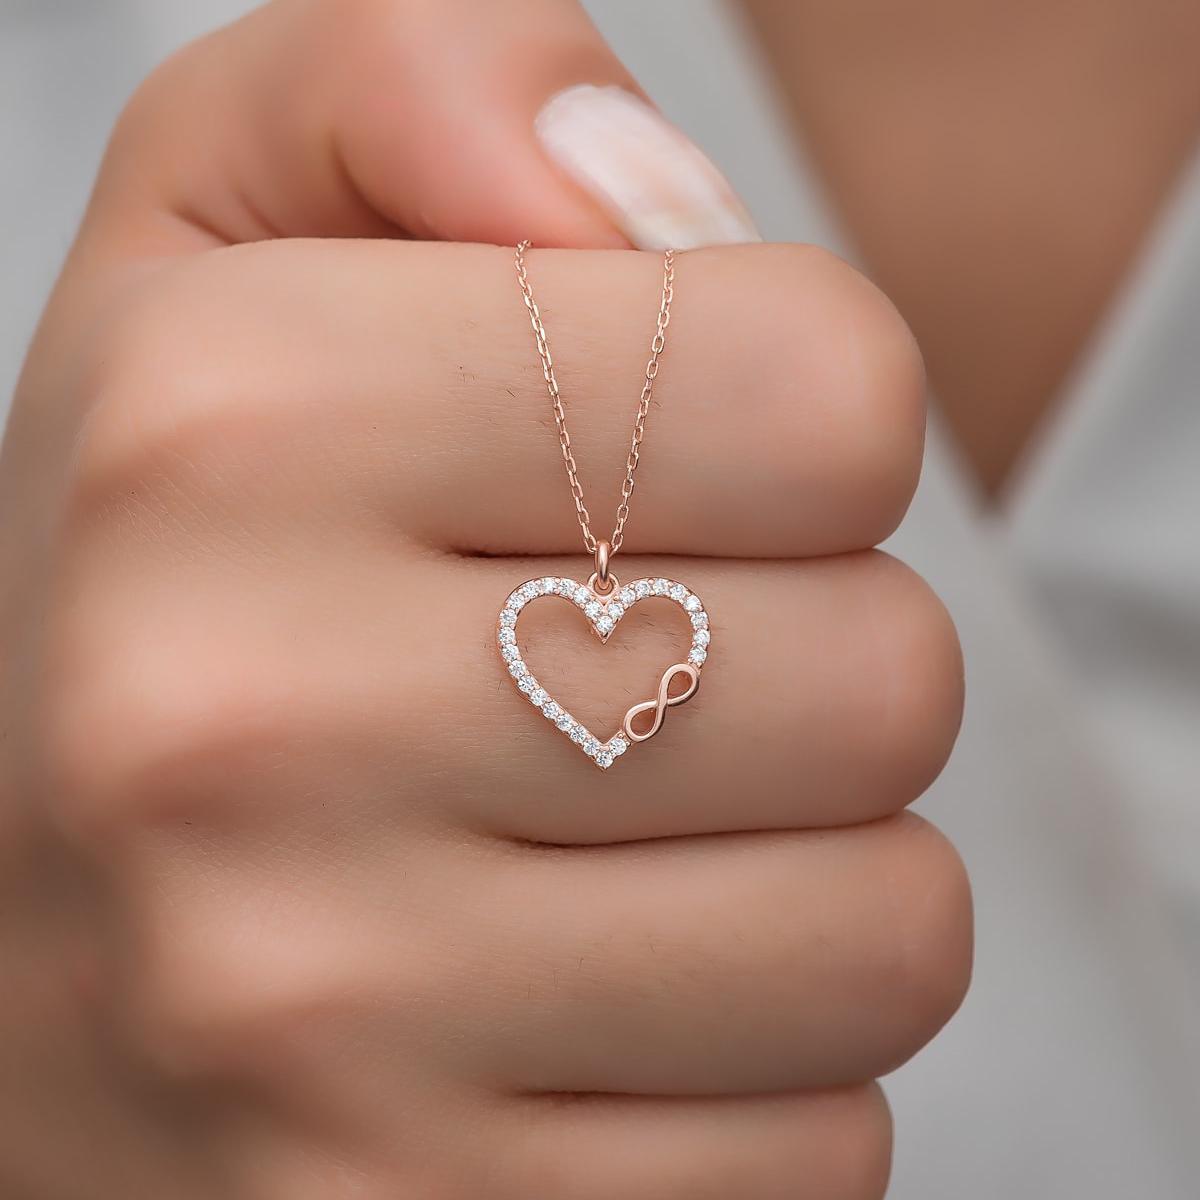 Rose Gold Tiny Infinity Necklace • Infinity Symbol Heart Necklace - Trending Silver Gifts